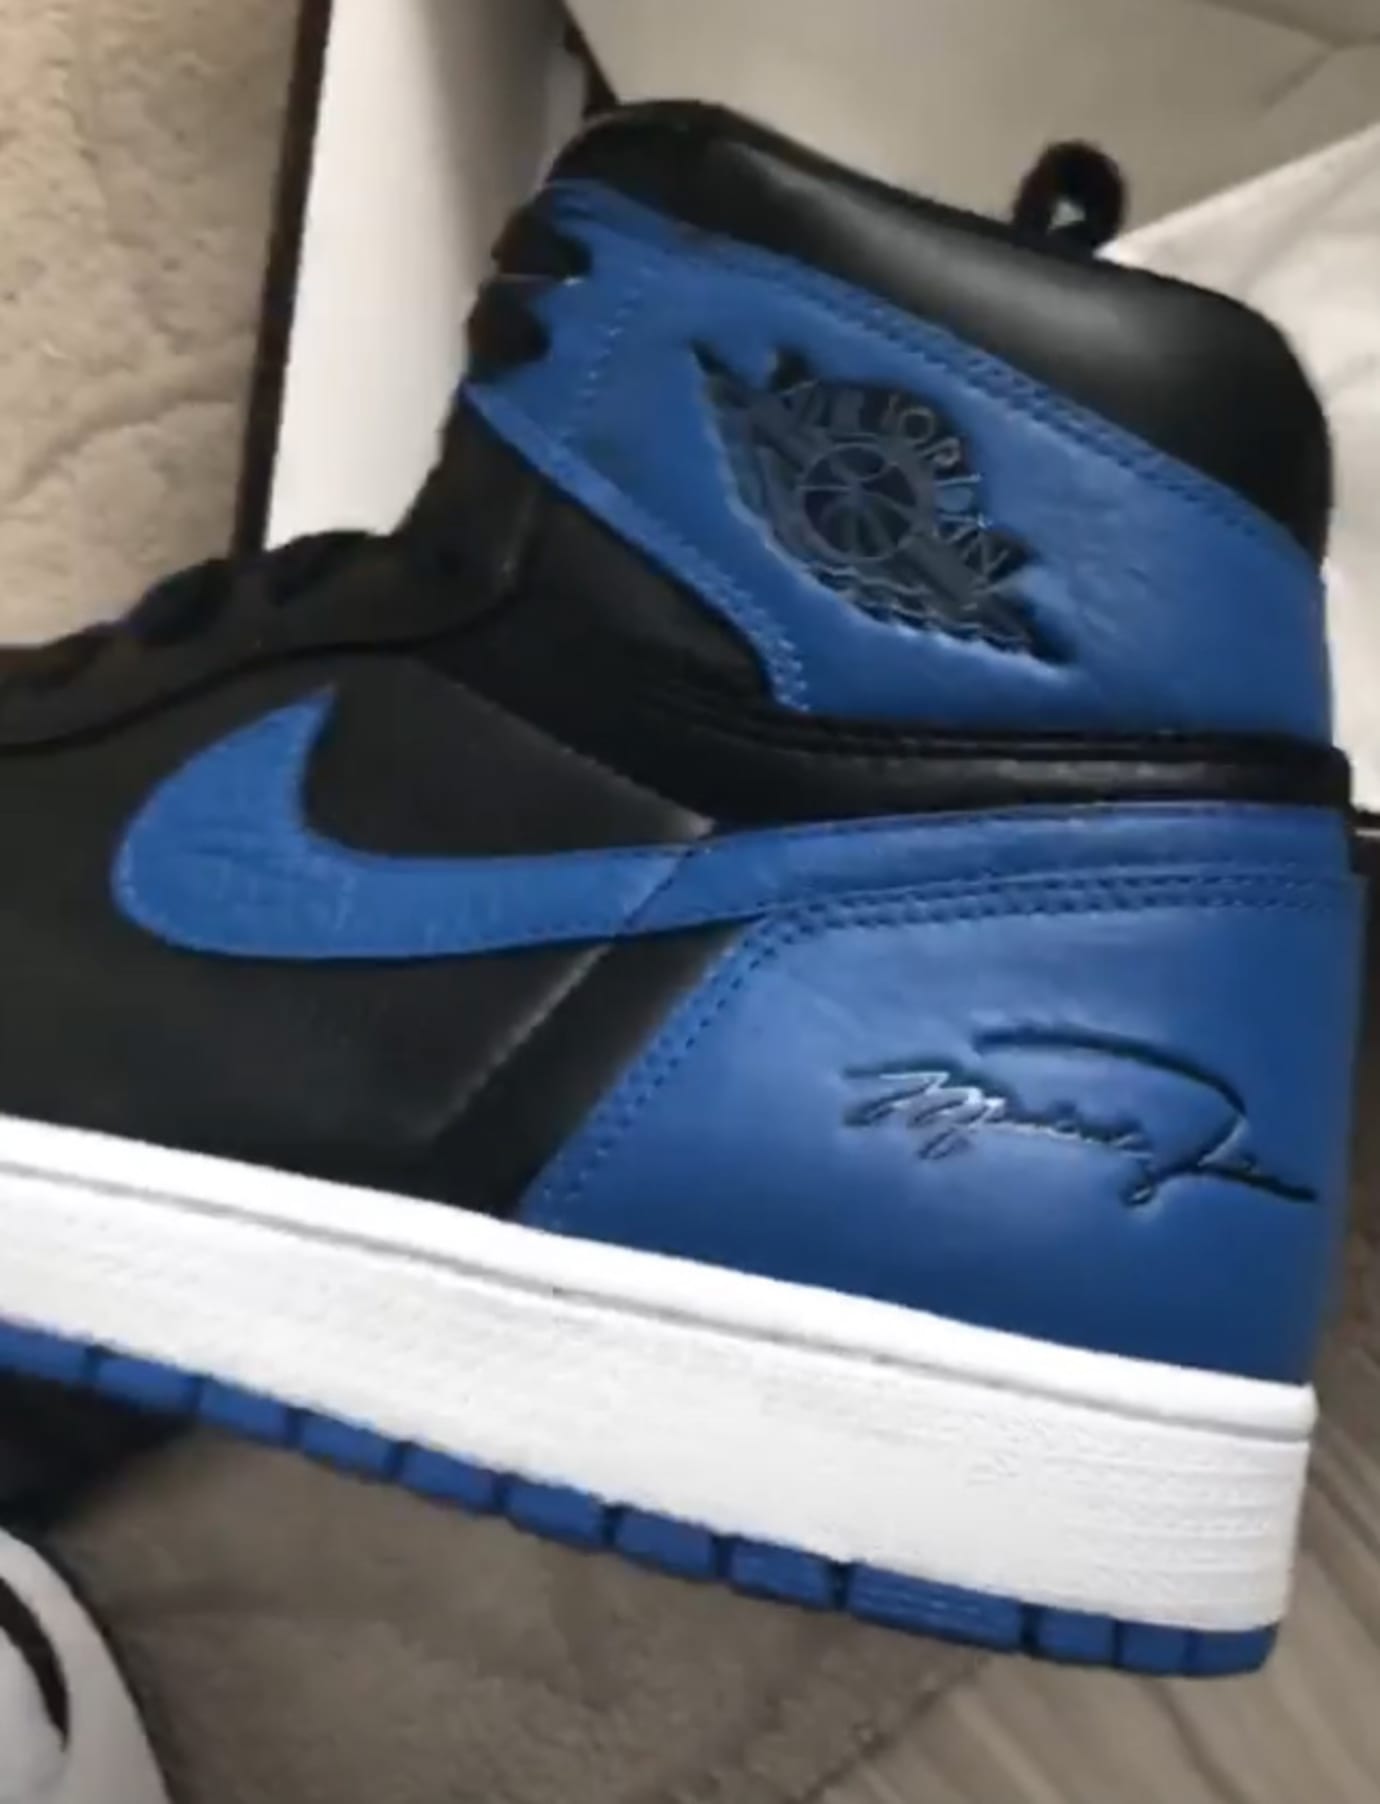 representative onion novel Air Jordan 1 'Board of Governors' Royal H2H Release Date | Sole Collector